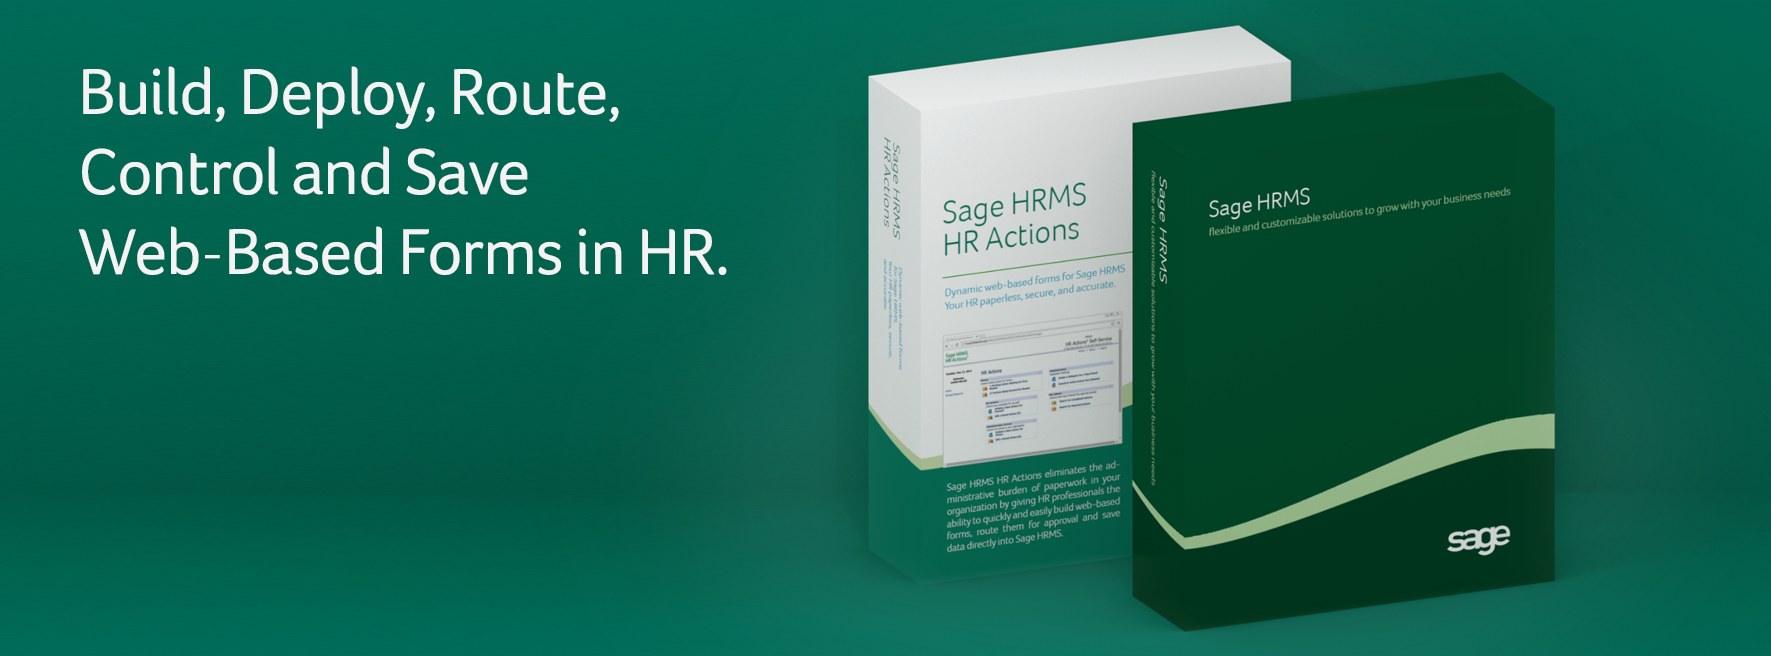 sage-hrms-hr-actions-2020